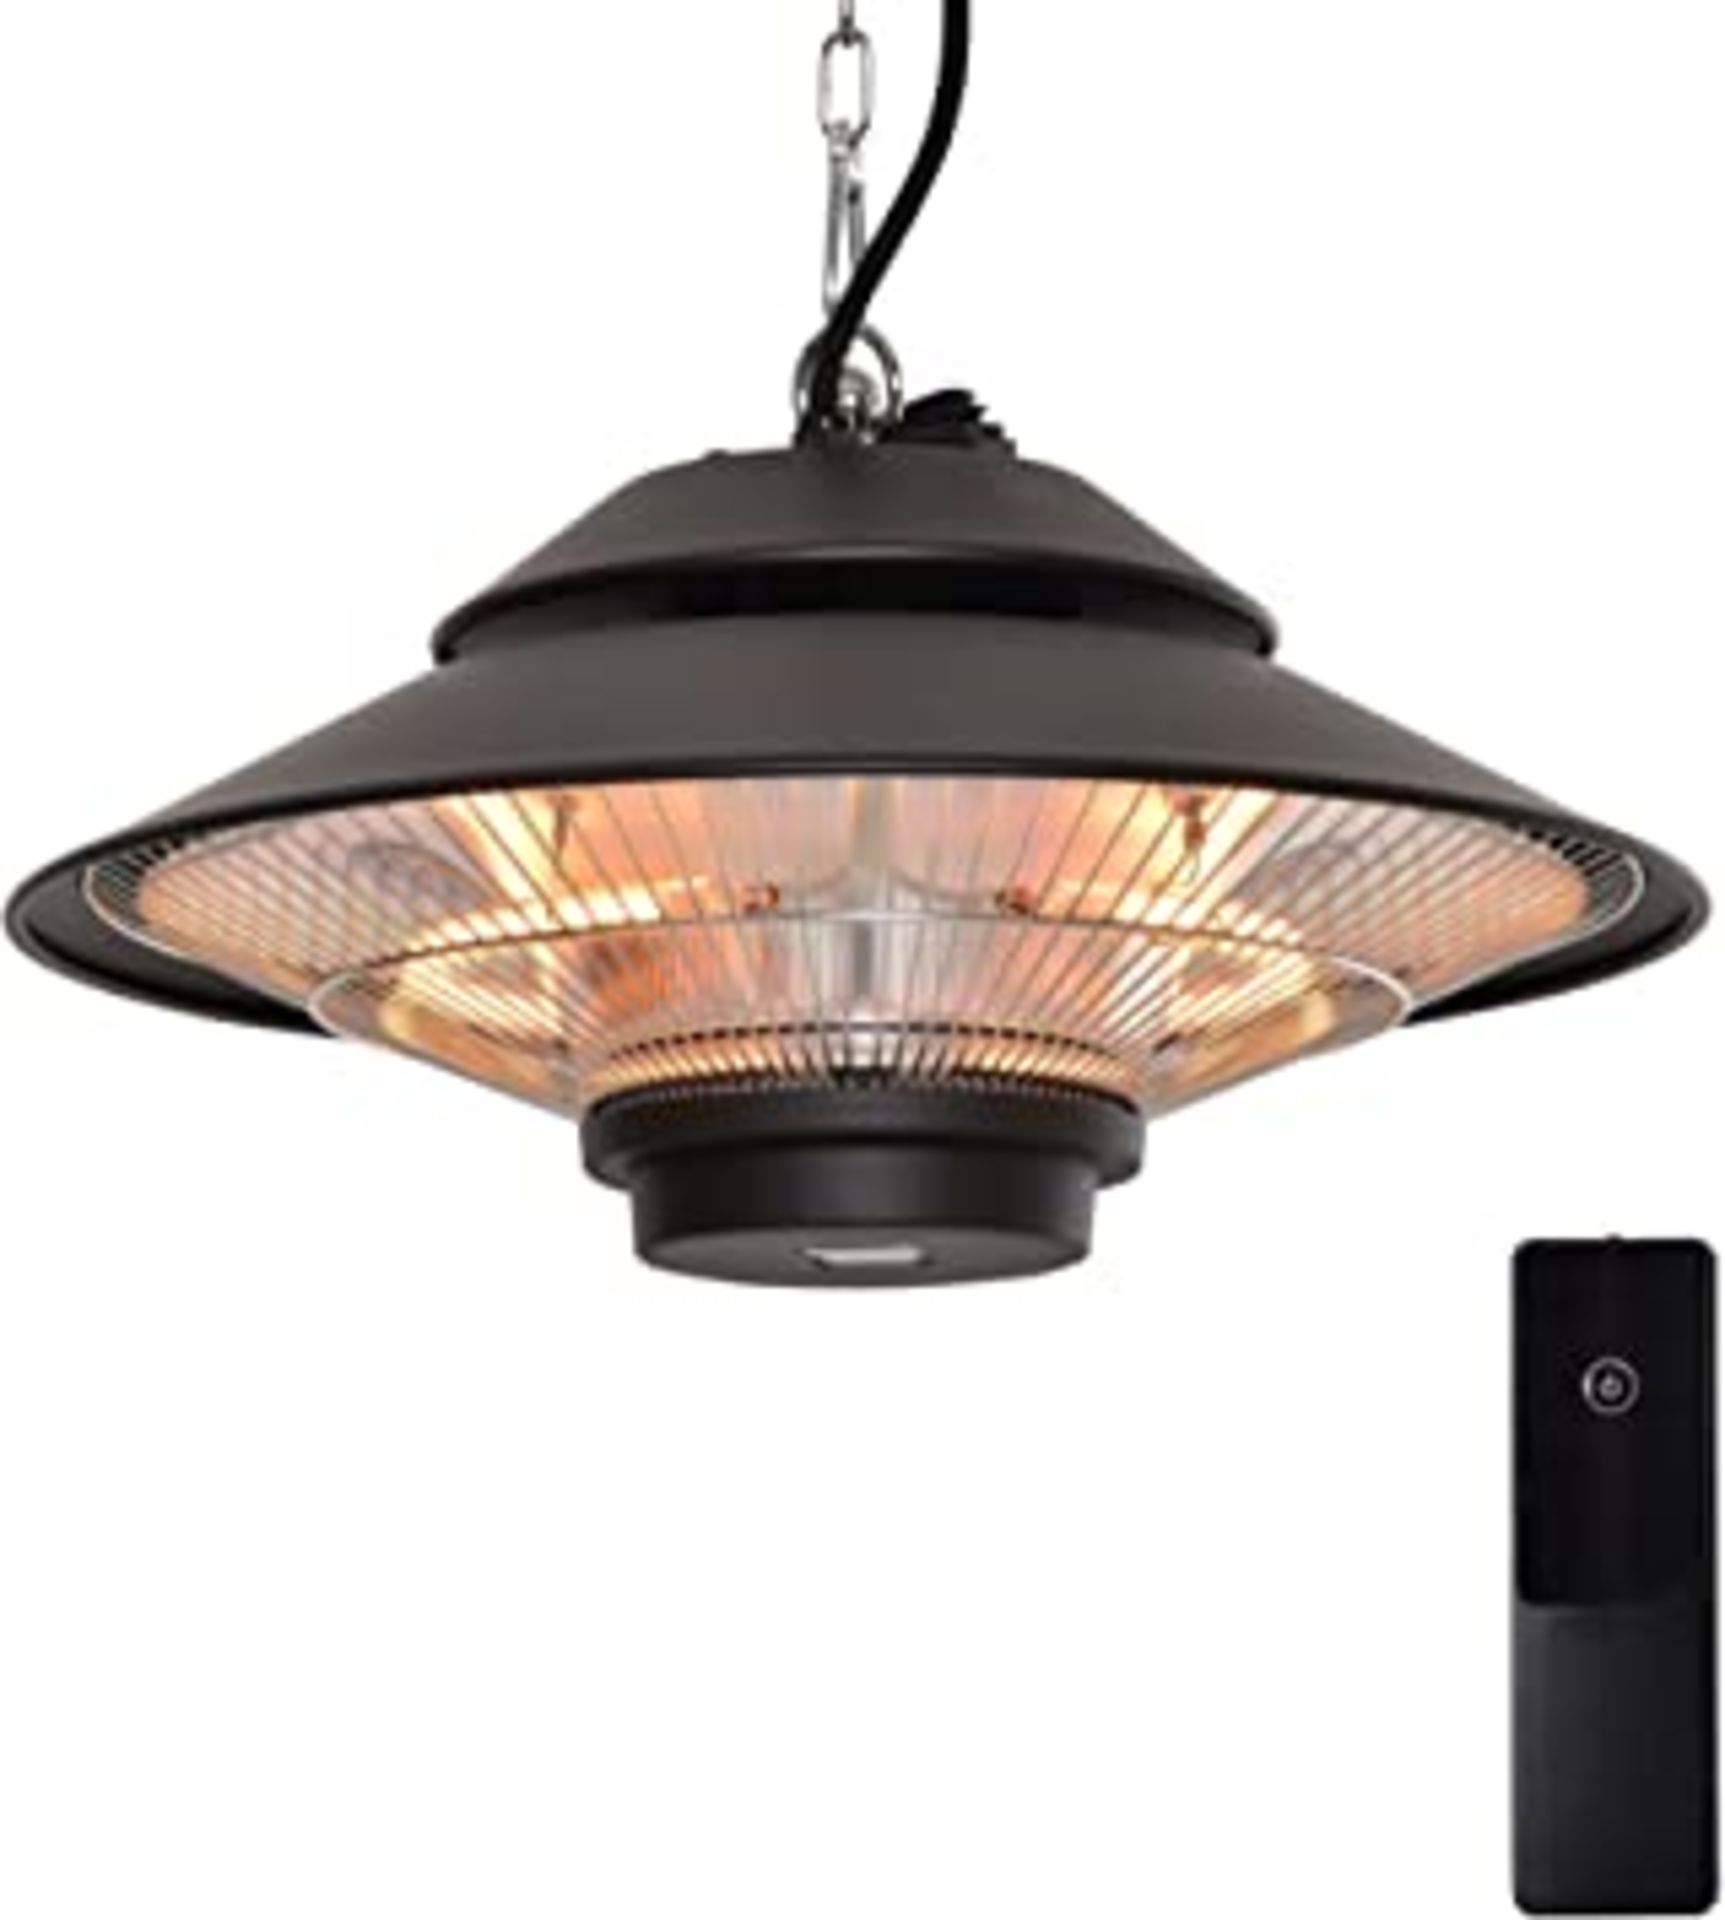 CEILING MOUNTED HEATER RRP £75.99